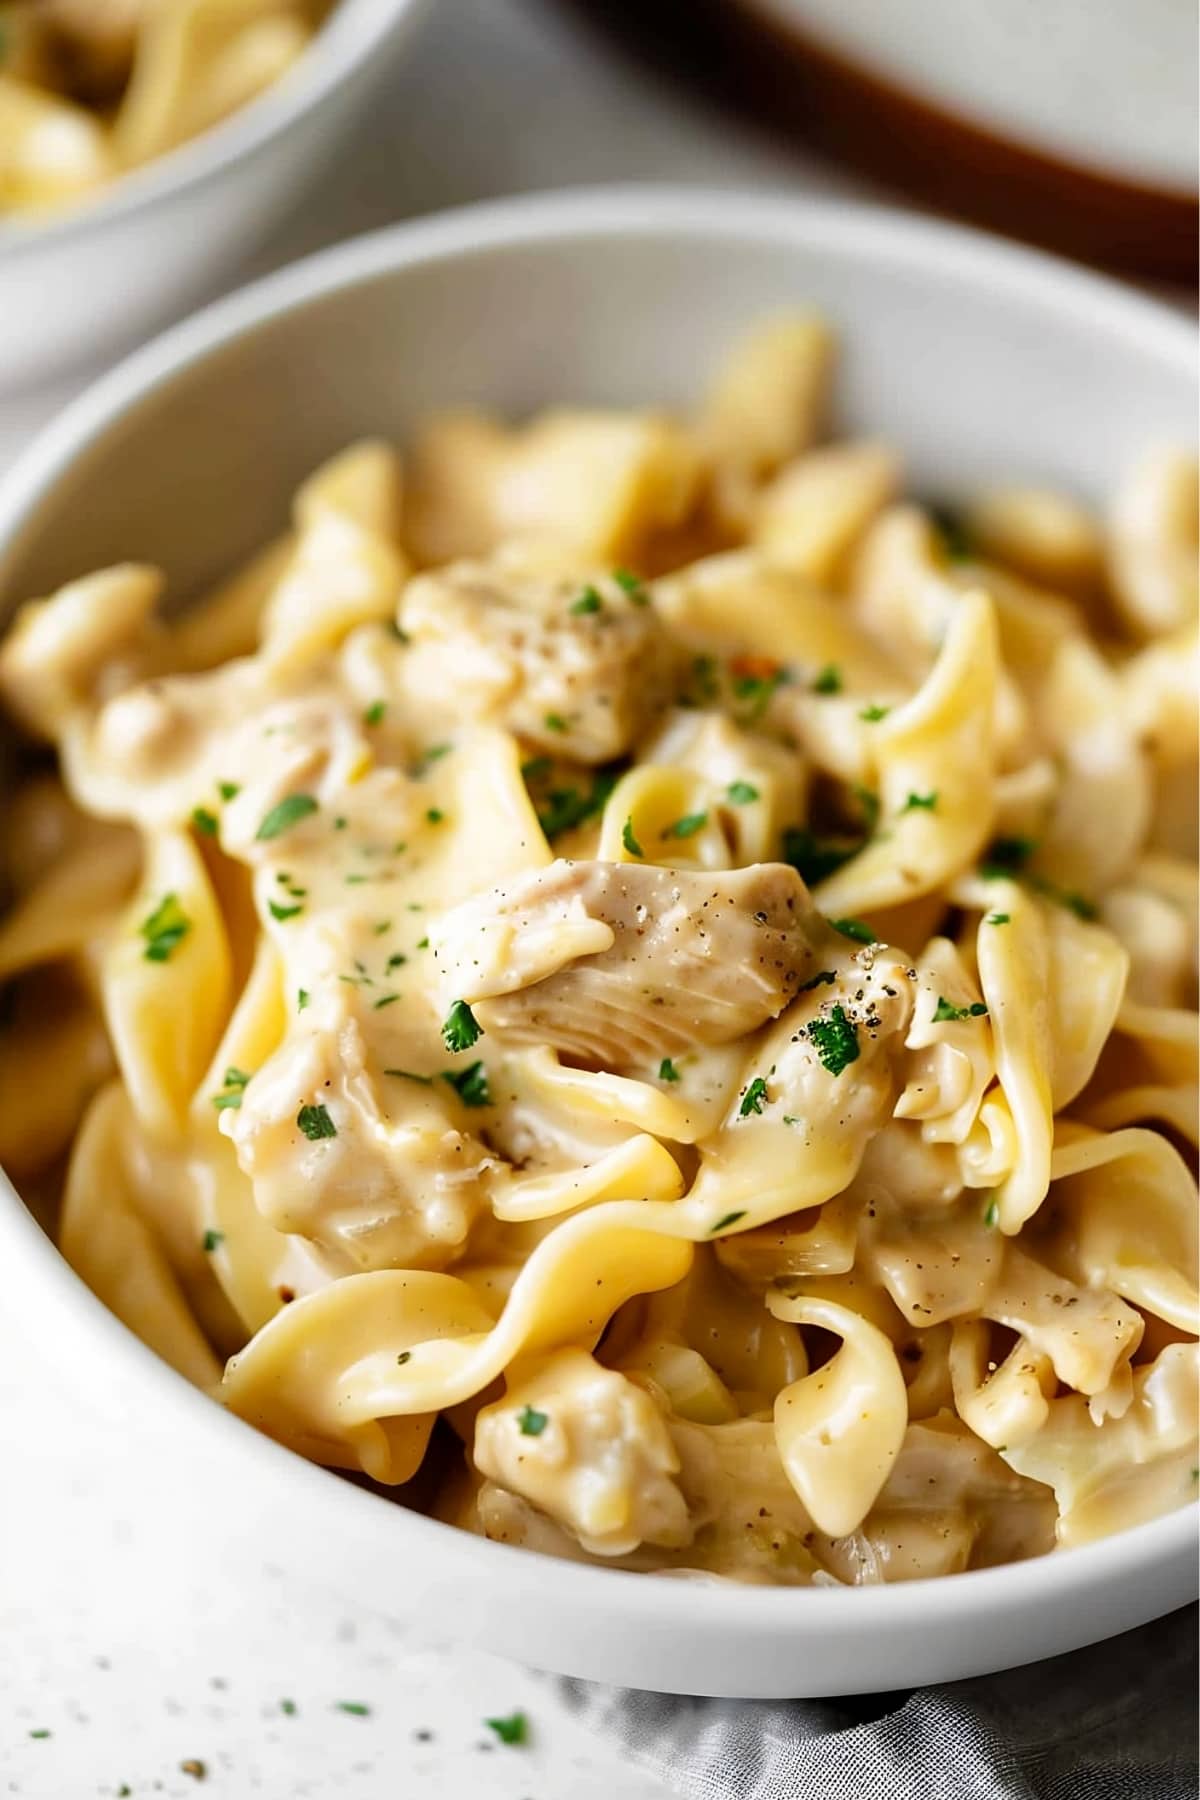 Bowl of creamy chicken and noodles with parsley